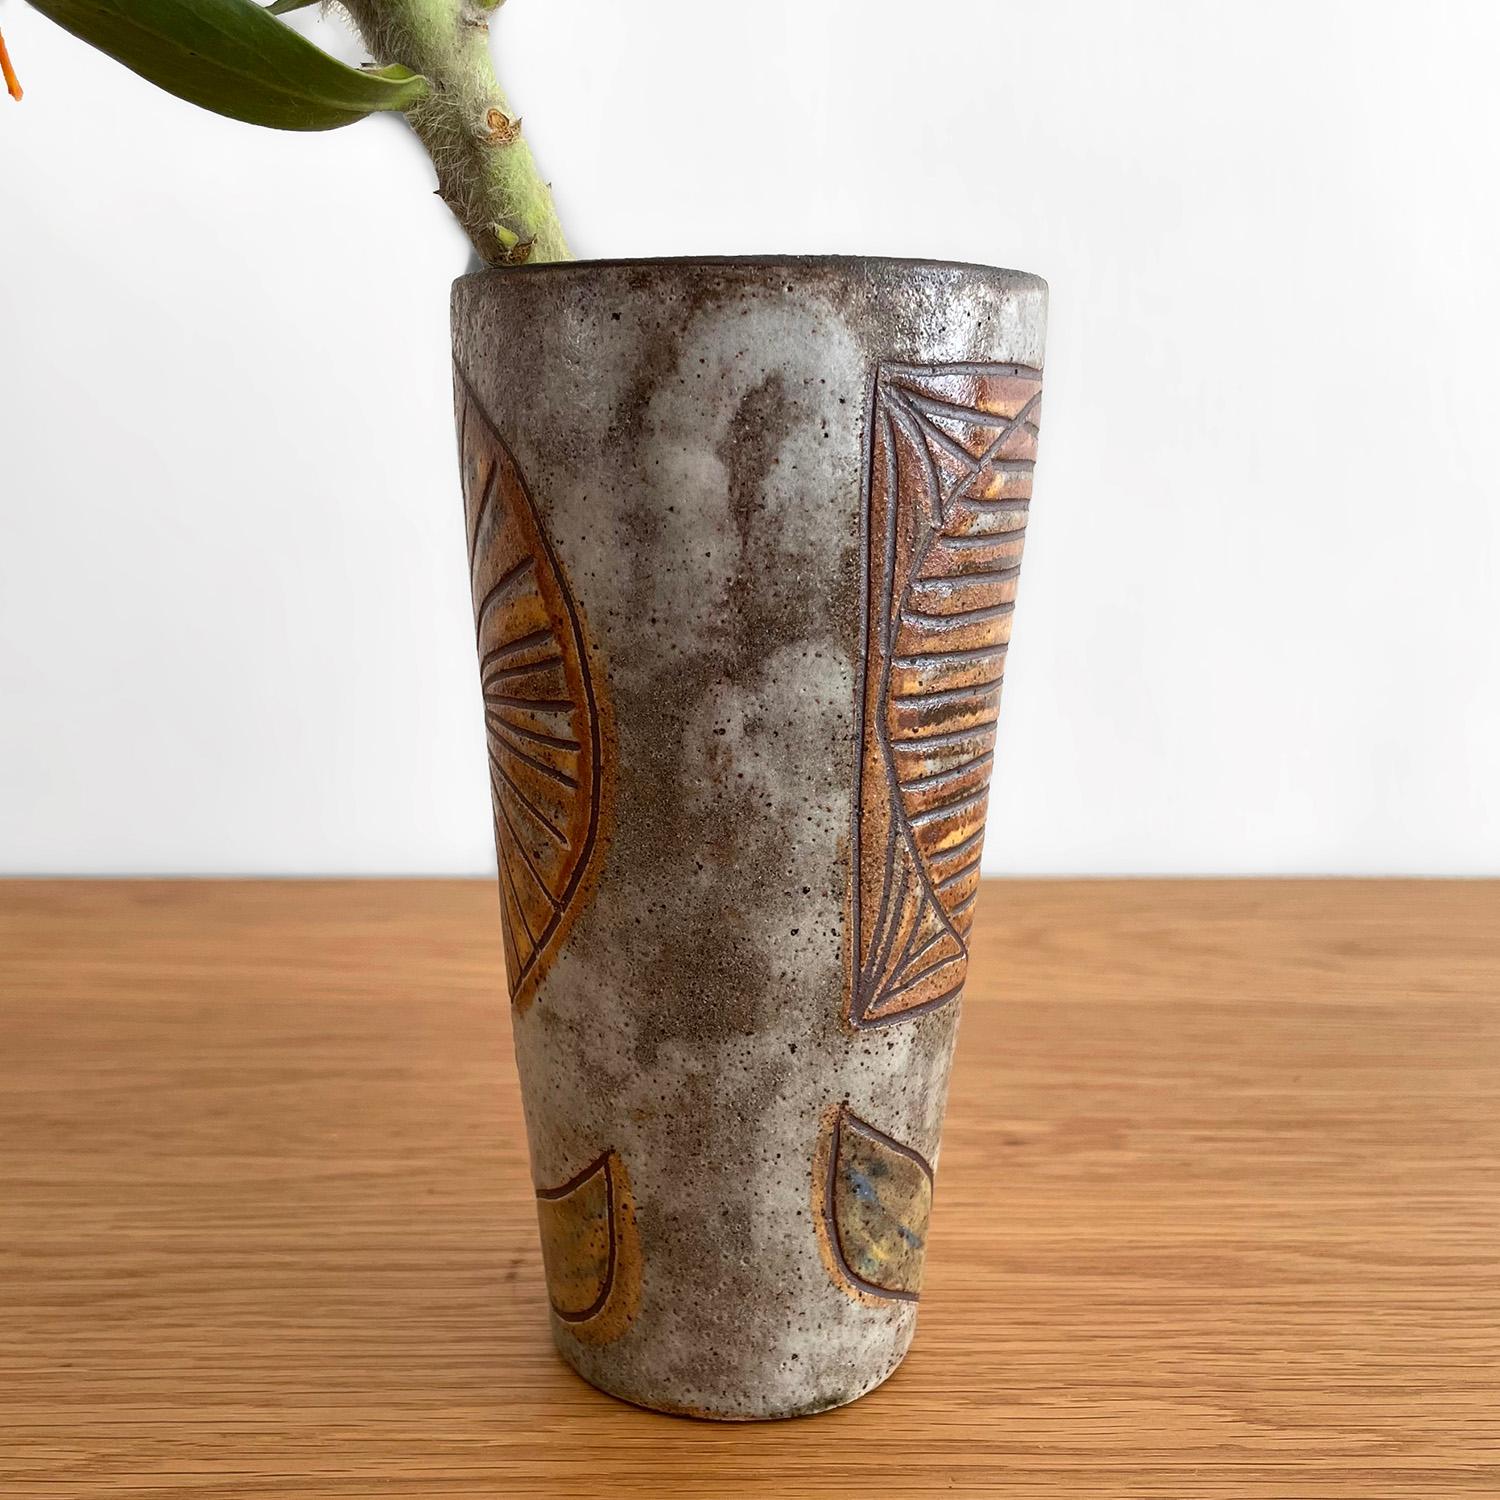 French Midcentury Vase by Alexandre Kostanda  
France, circa 1960s
Two unique floral motifs created from intricately scarred lines
Modern neutral palette
Marked identification
Perfectly preserved